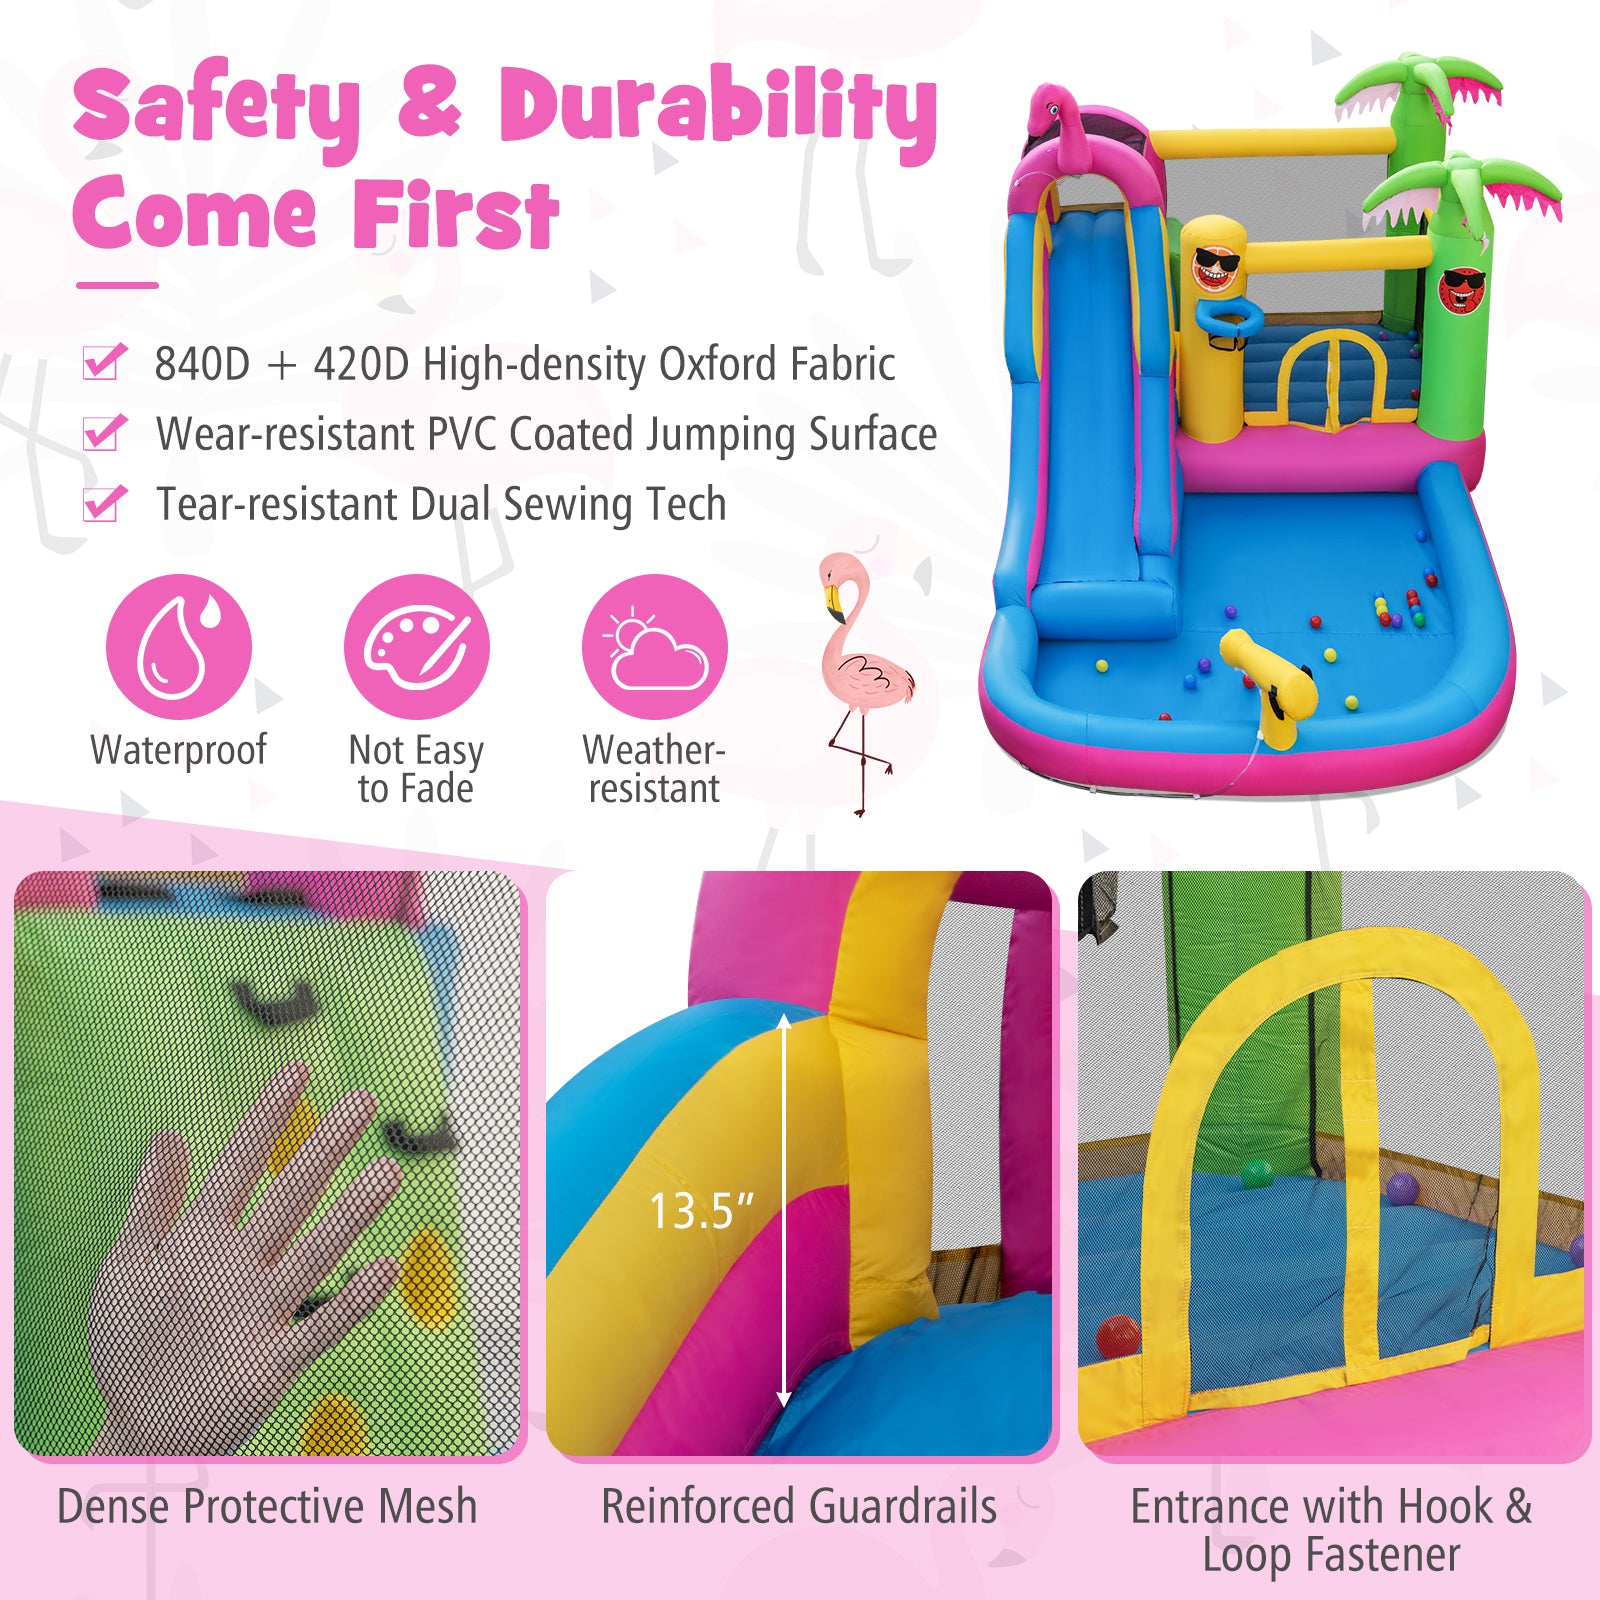 Enhanced durability for non-stop play: Constructed with waterproof and weather-resistant Oxford fabric, our bounce castle is built to withstand years of use. The sliding surface is reinforced with 840D thickened fabric, while the jumping surface is laminated with PVC material for maximum durability.